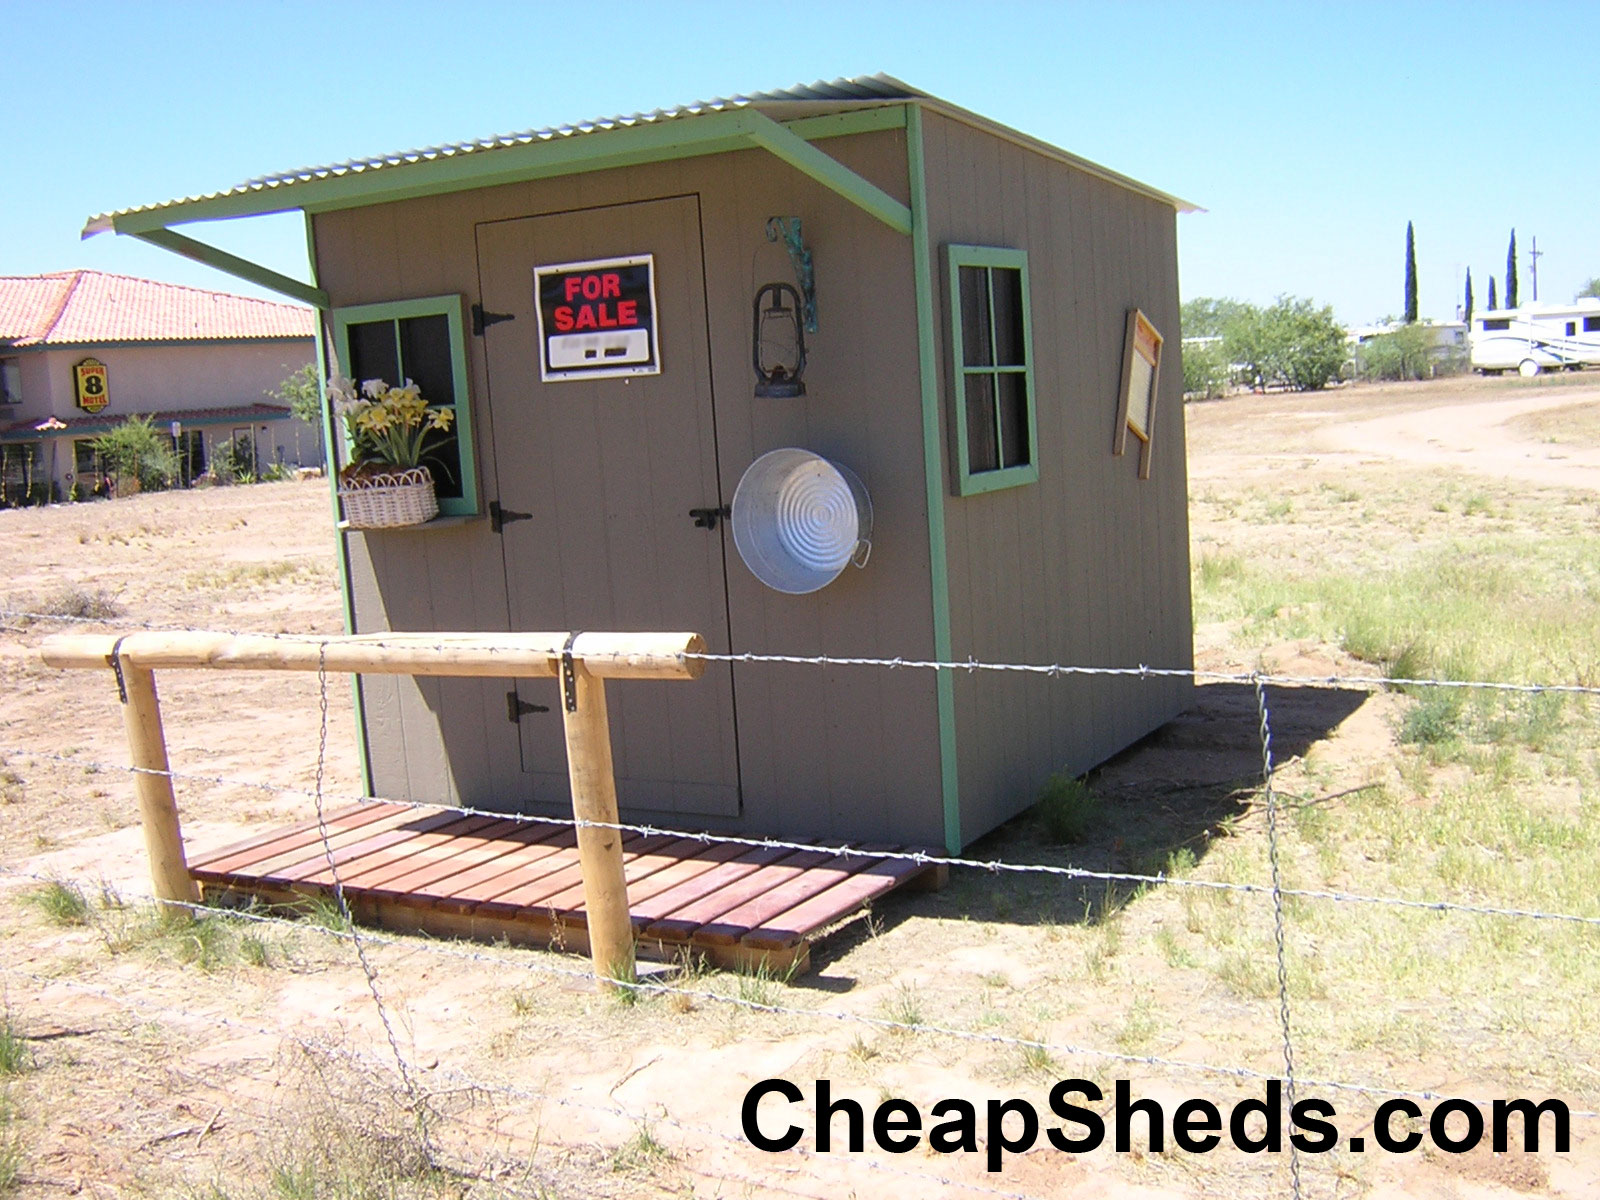 Home » Shed Plans » Build A Shed Estimate Cost